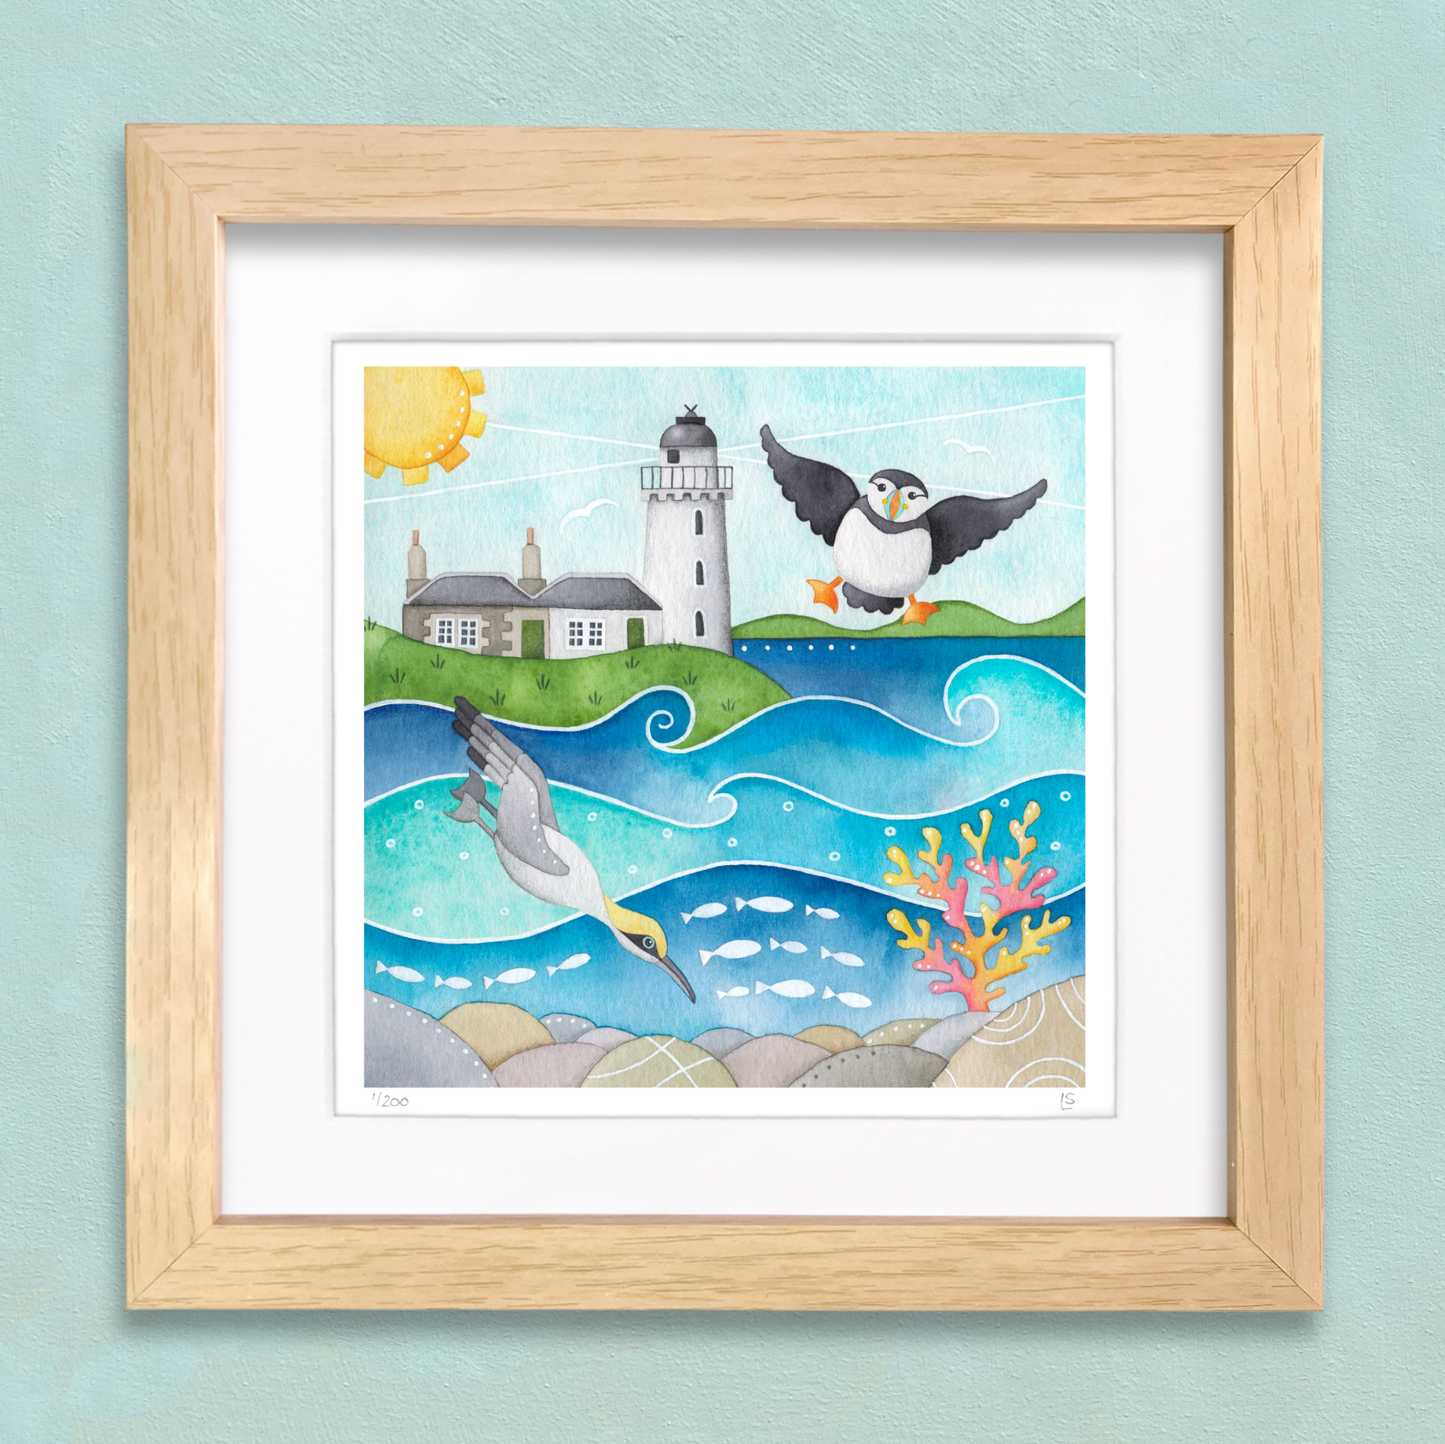 Framed Seaside Print - Puffin, Diving Gannet & Lighthouse, Isle of May - East Neuk of Fife Watercolour Painting